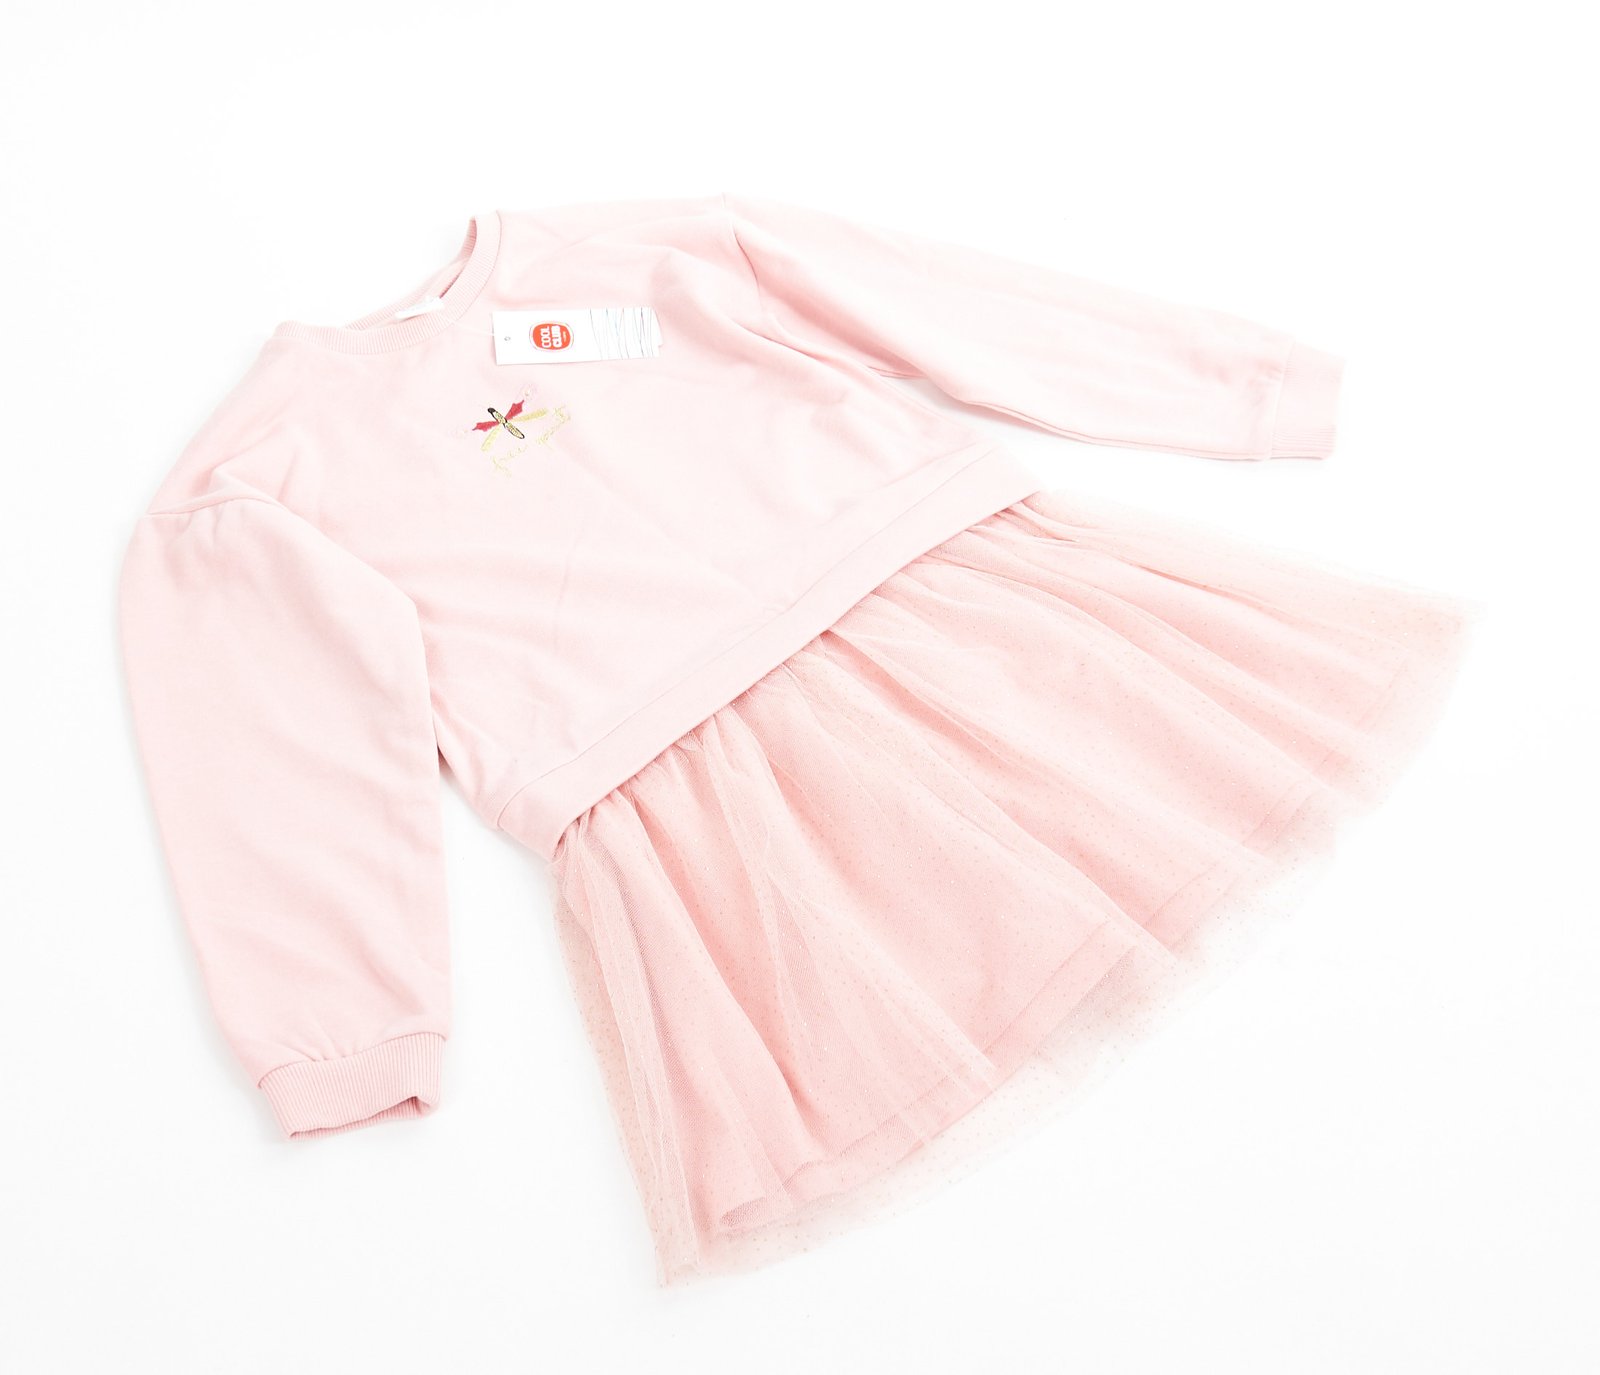 Kidsclothing childrenclothes Childrenwear CoolClub outletclothes stockclothes drabuziai didmena стокодежда stockclothes outletclothes brandedclothes eudra kidsclothes kidsmix